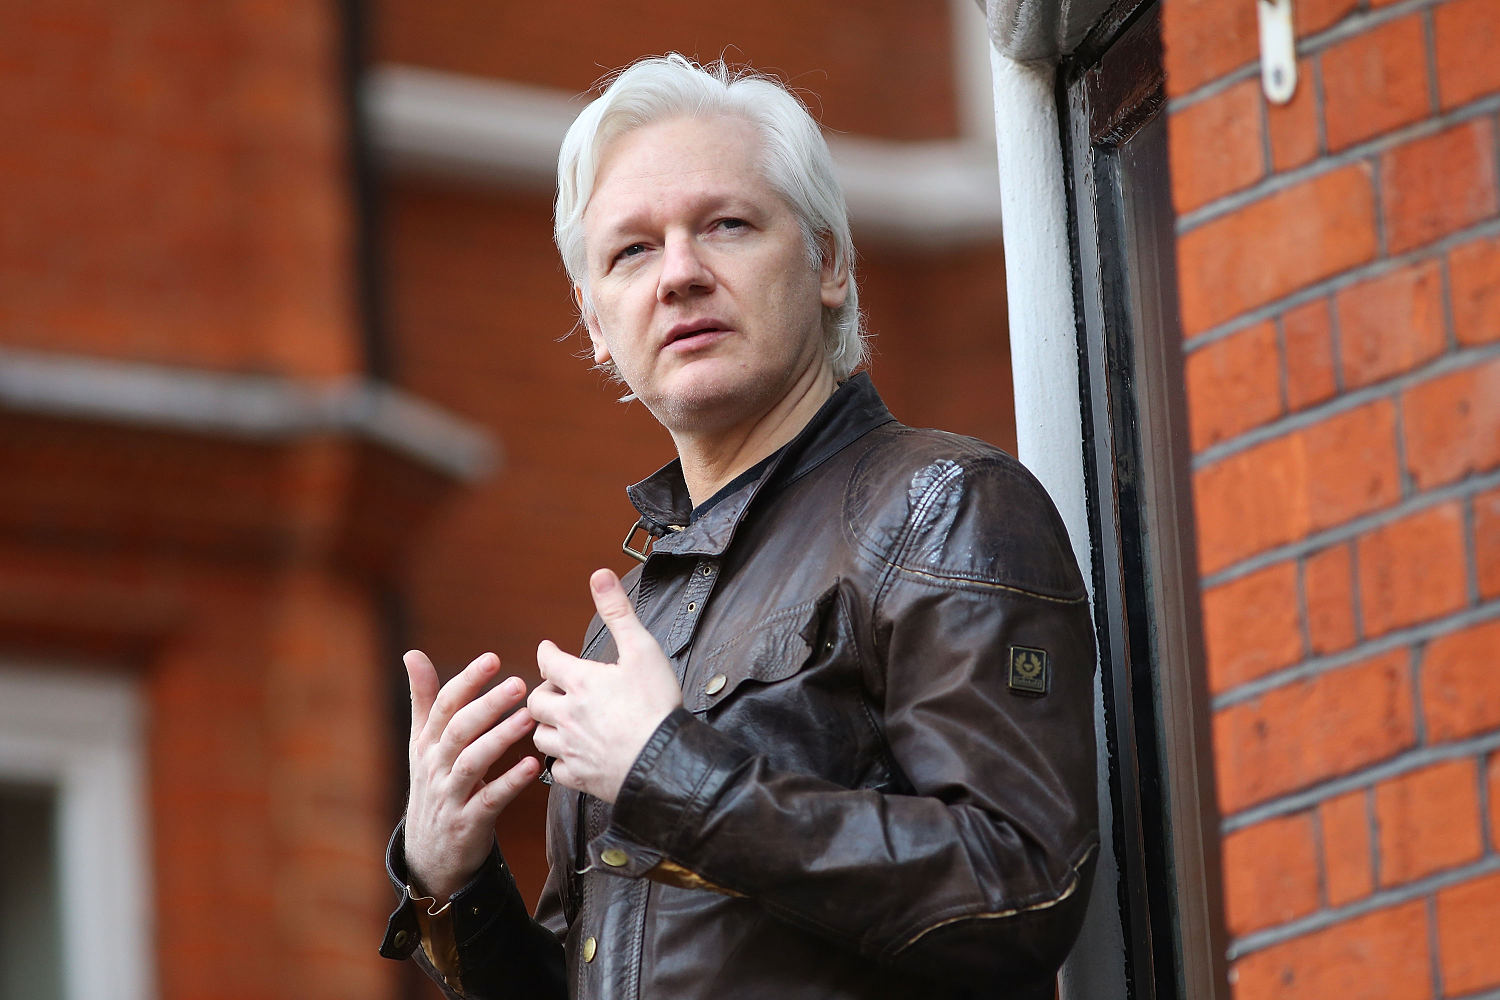 WikiLeaks founder Julian Assange reaches plea deal with the U.S., allowing him to go free